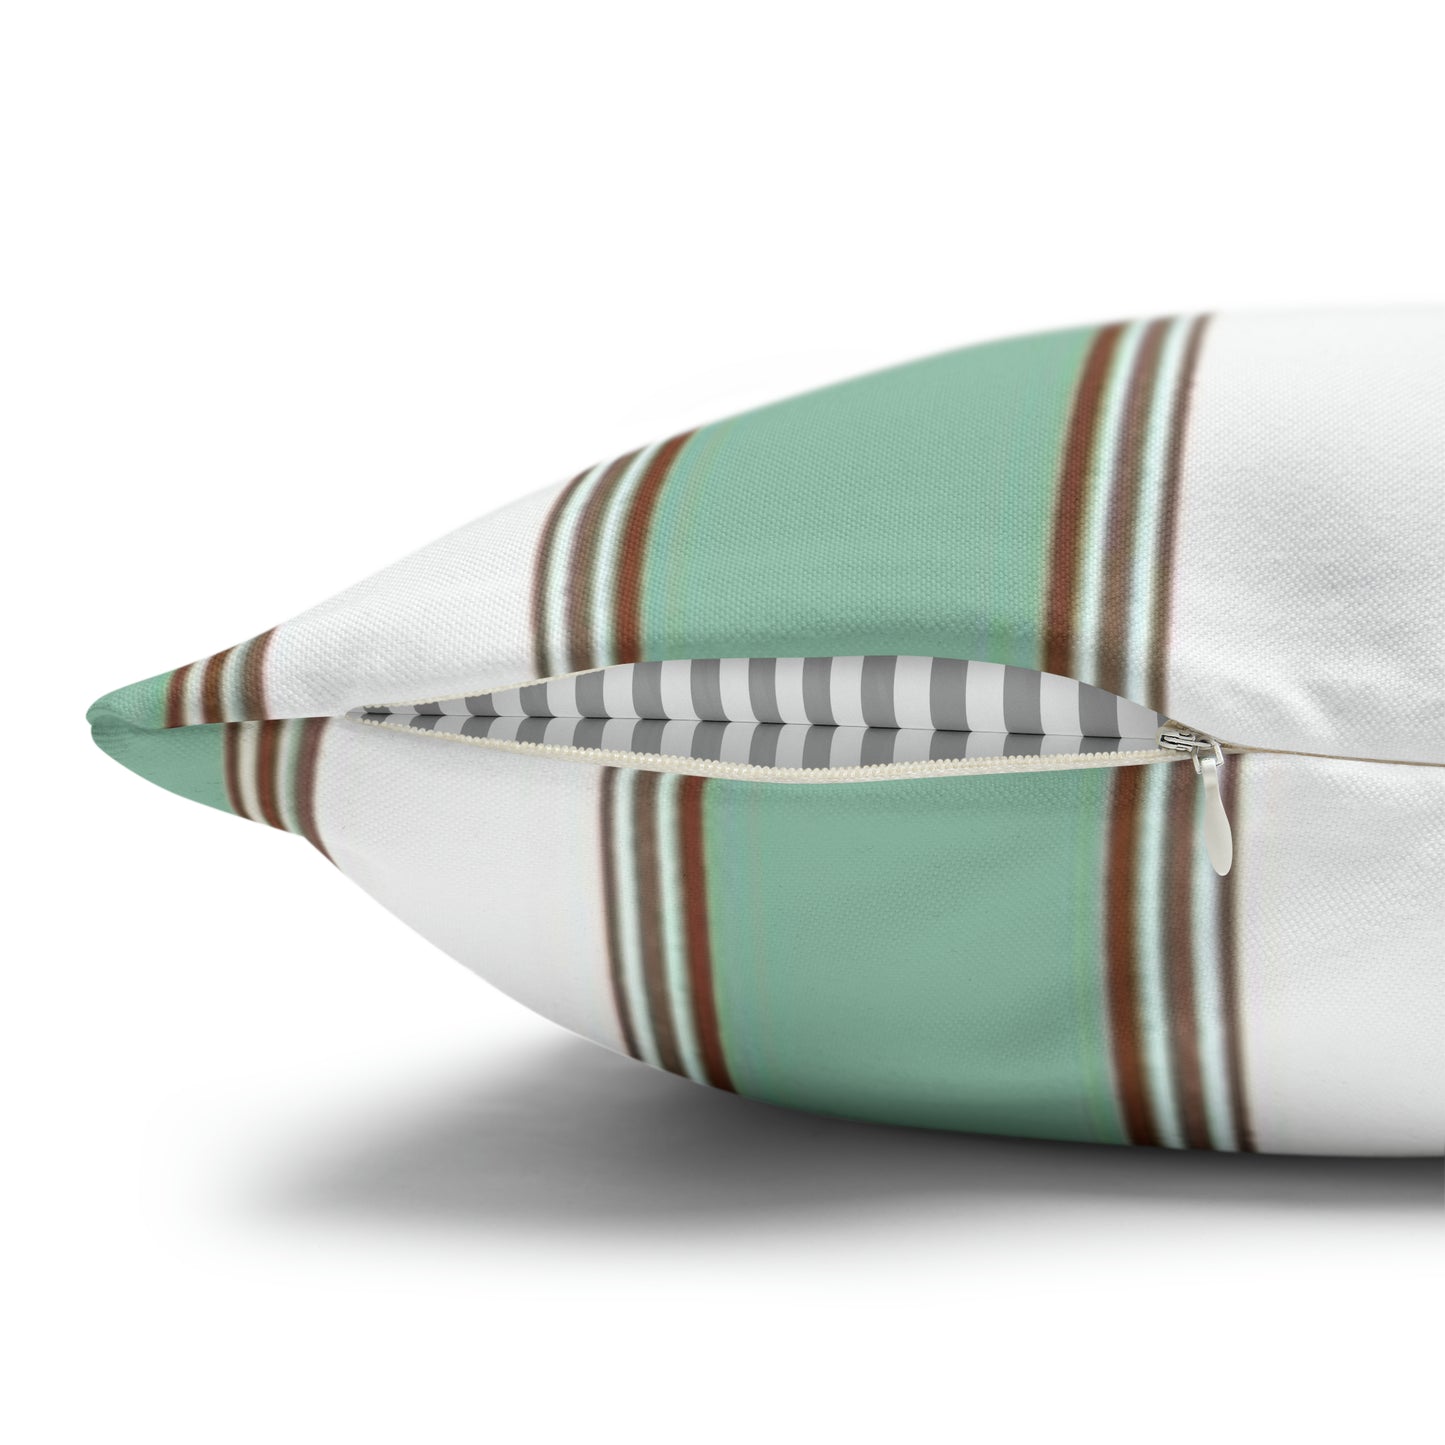 Sage and White Stripe, Pillow Case Only